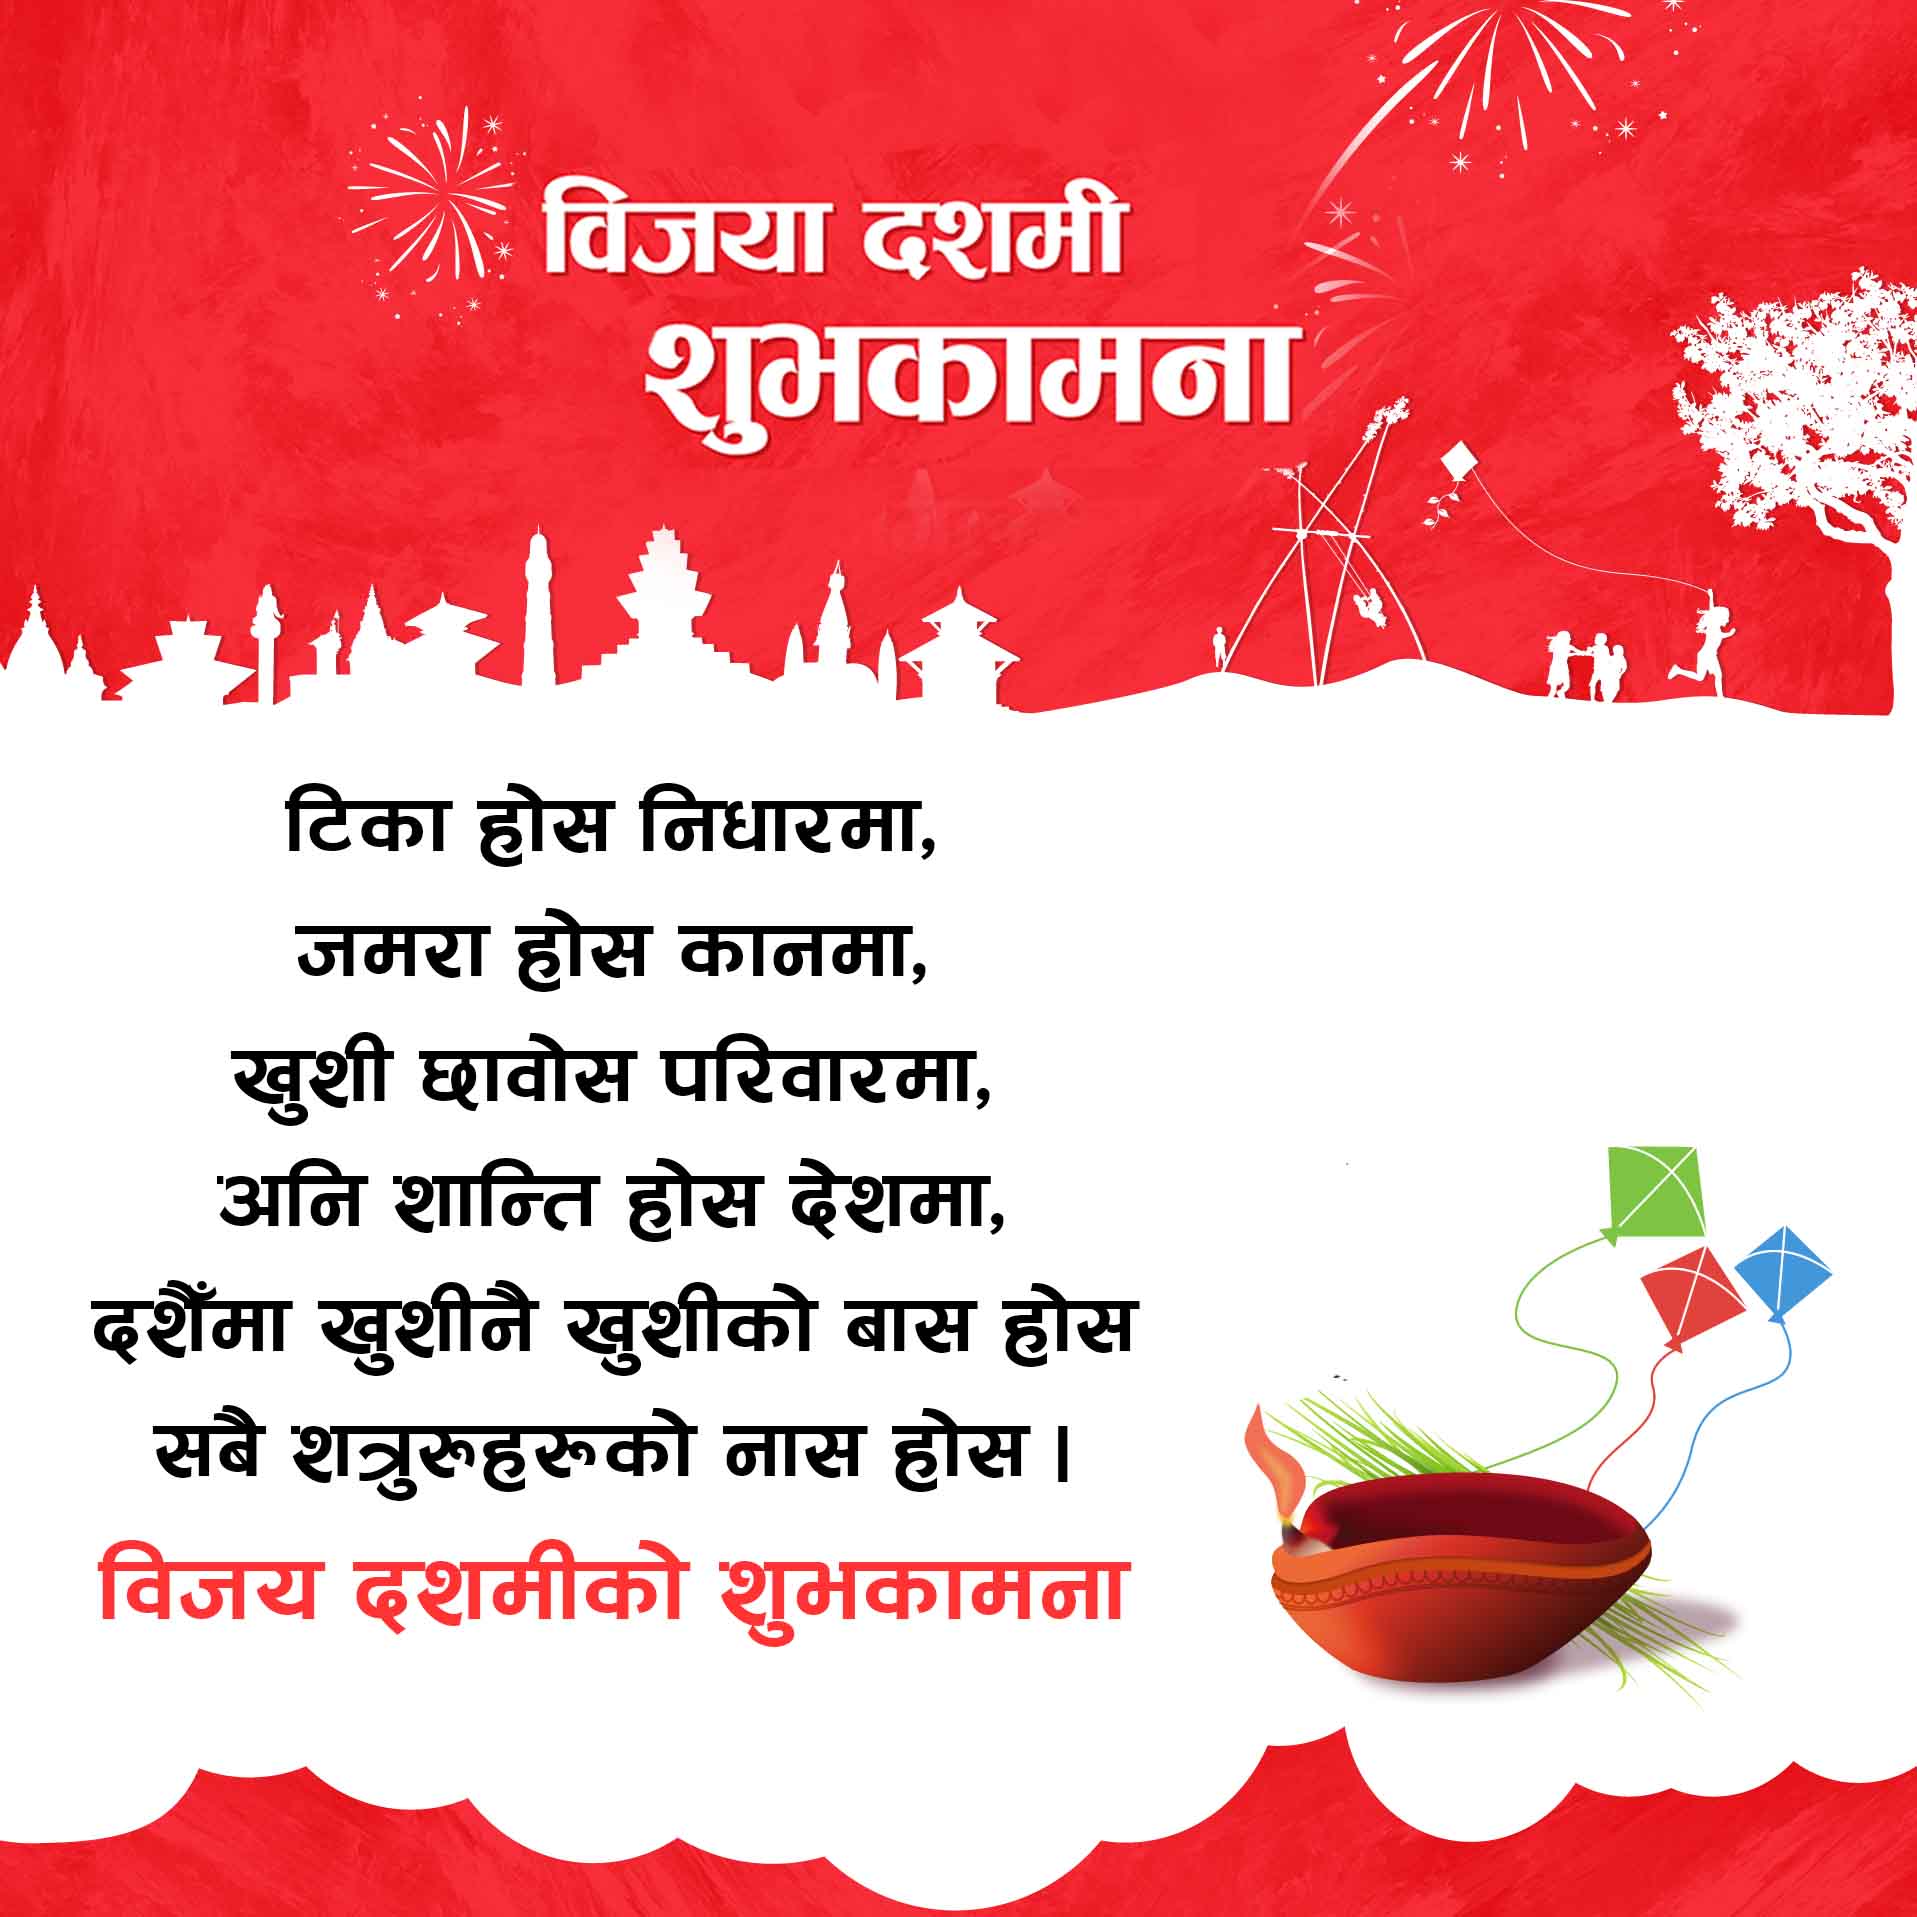 Wish your friends and family a special message in this Bijaya Dashain. Here is the Collection of Bijaya Dashami ko Shubhakamana message.